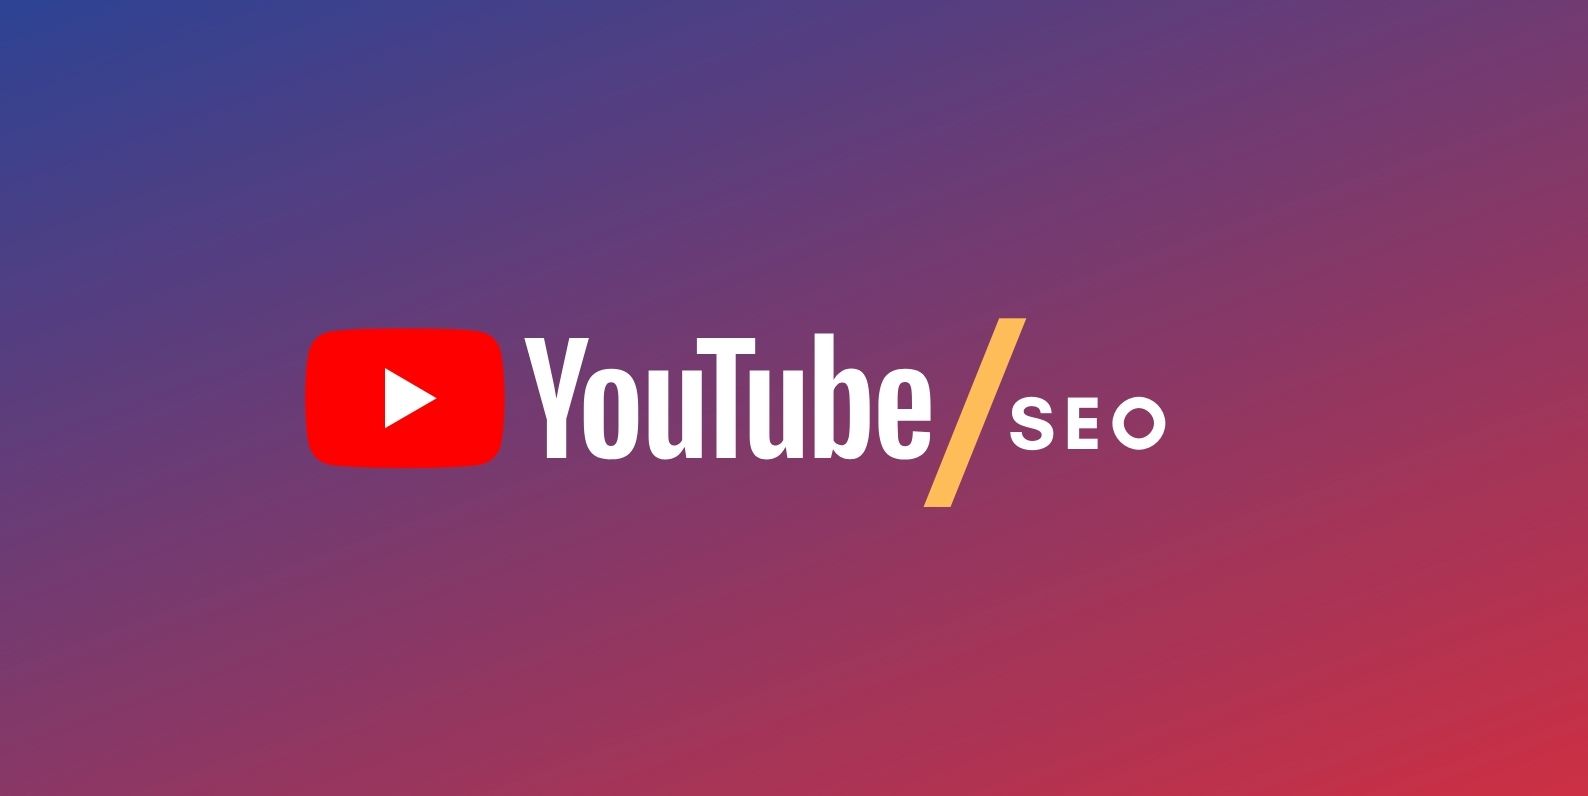 YouTube SEO – How to Rank YouTube Videos in 2022